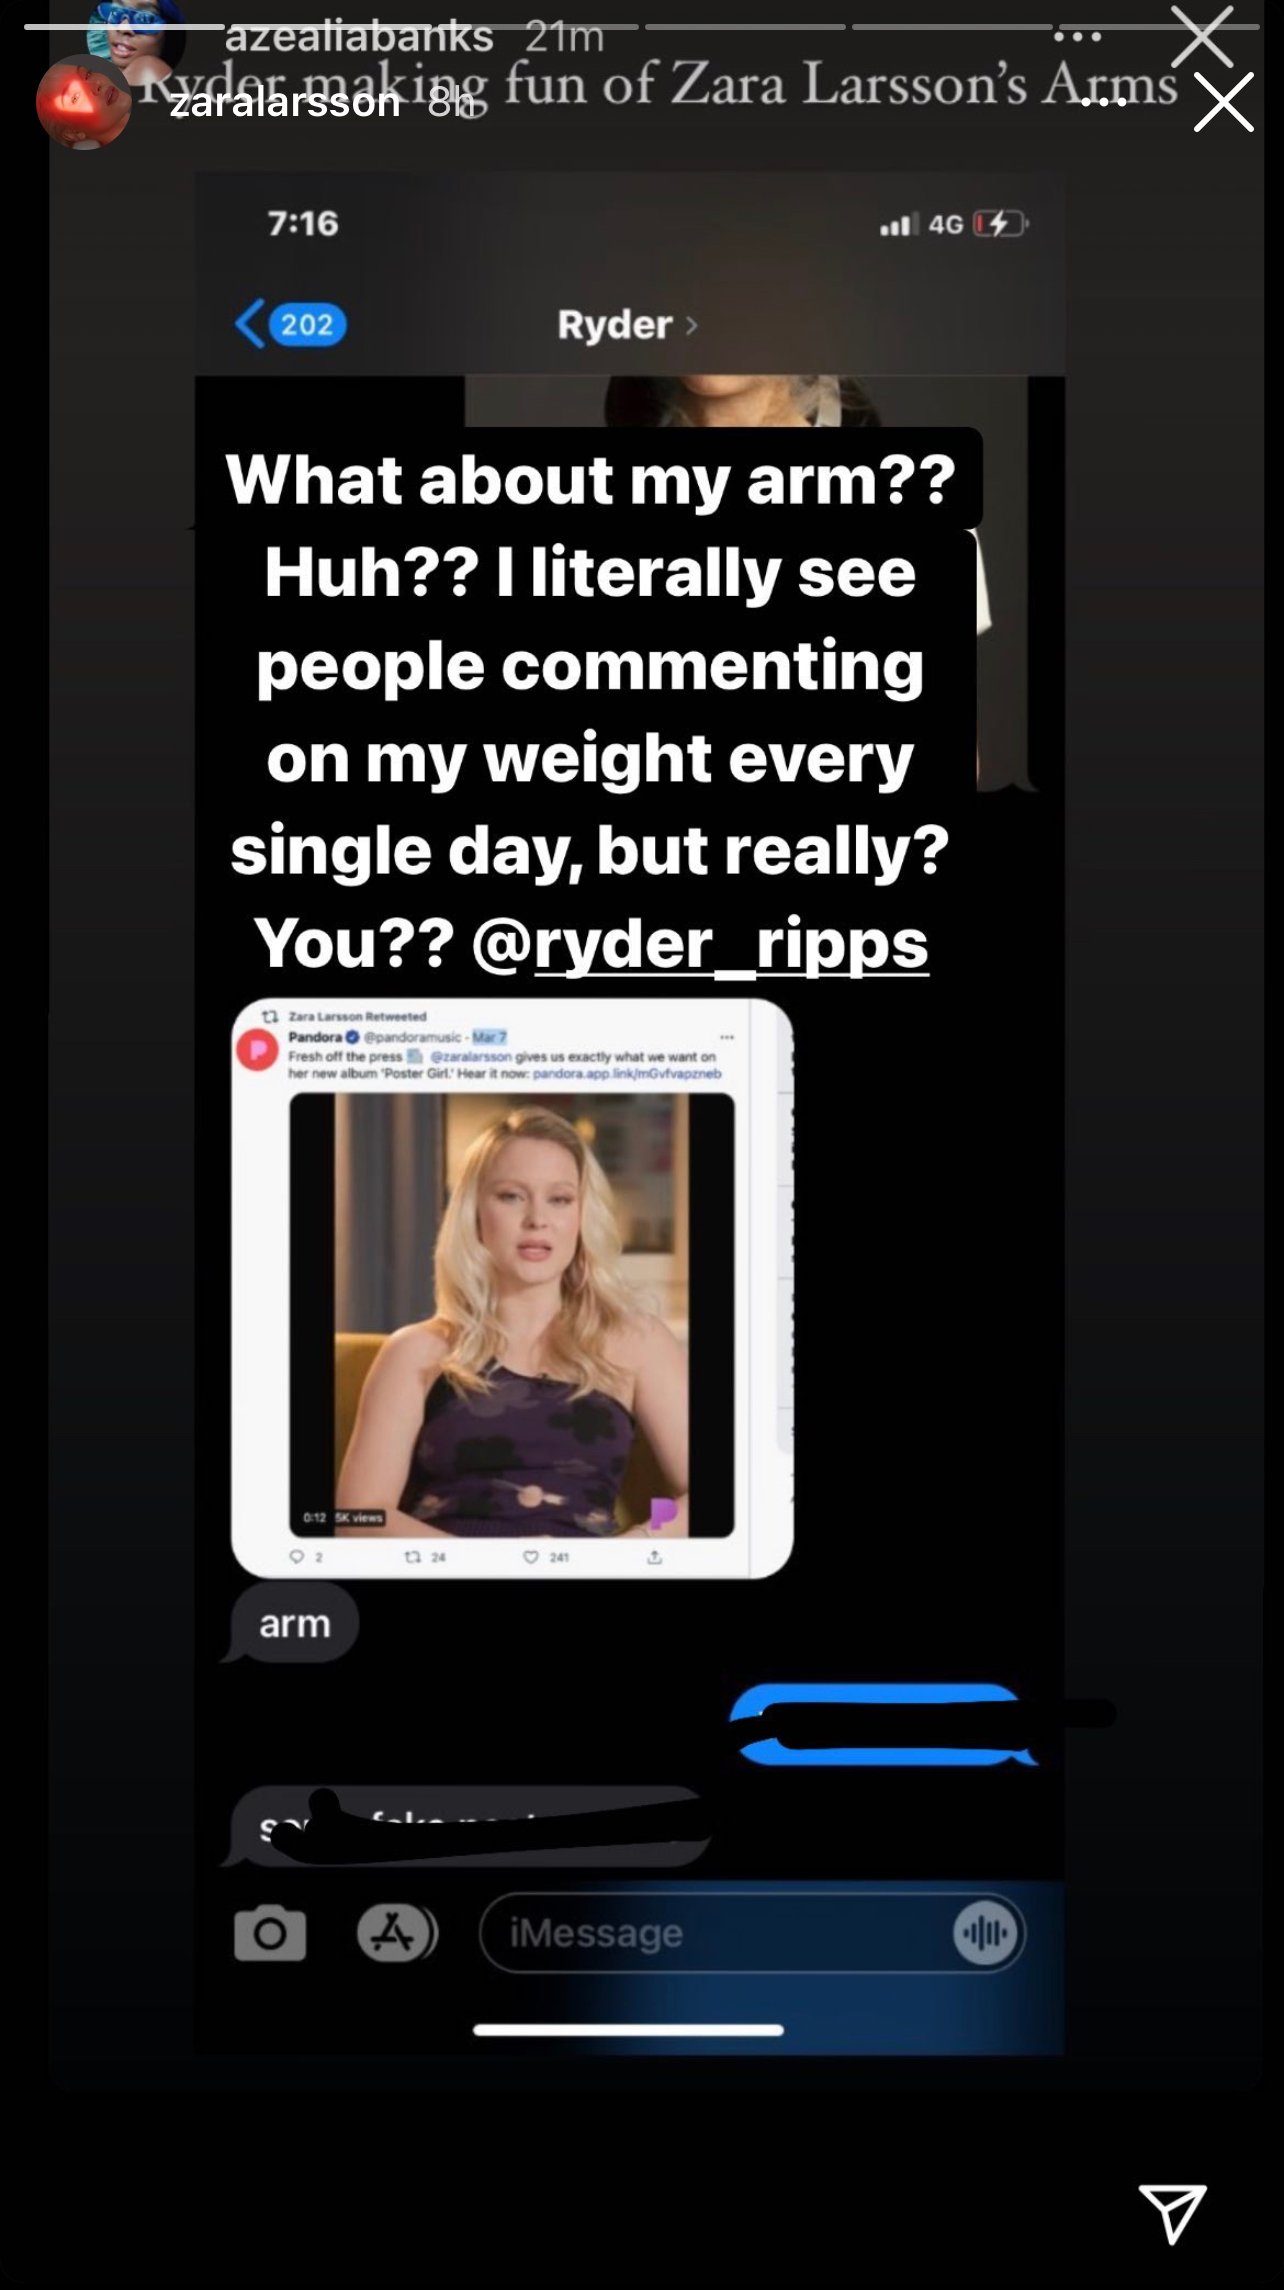 What about my arms? Huh? I literally see people commenting om my weight every singel day, but really? You? @ryder_ripps